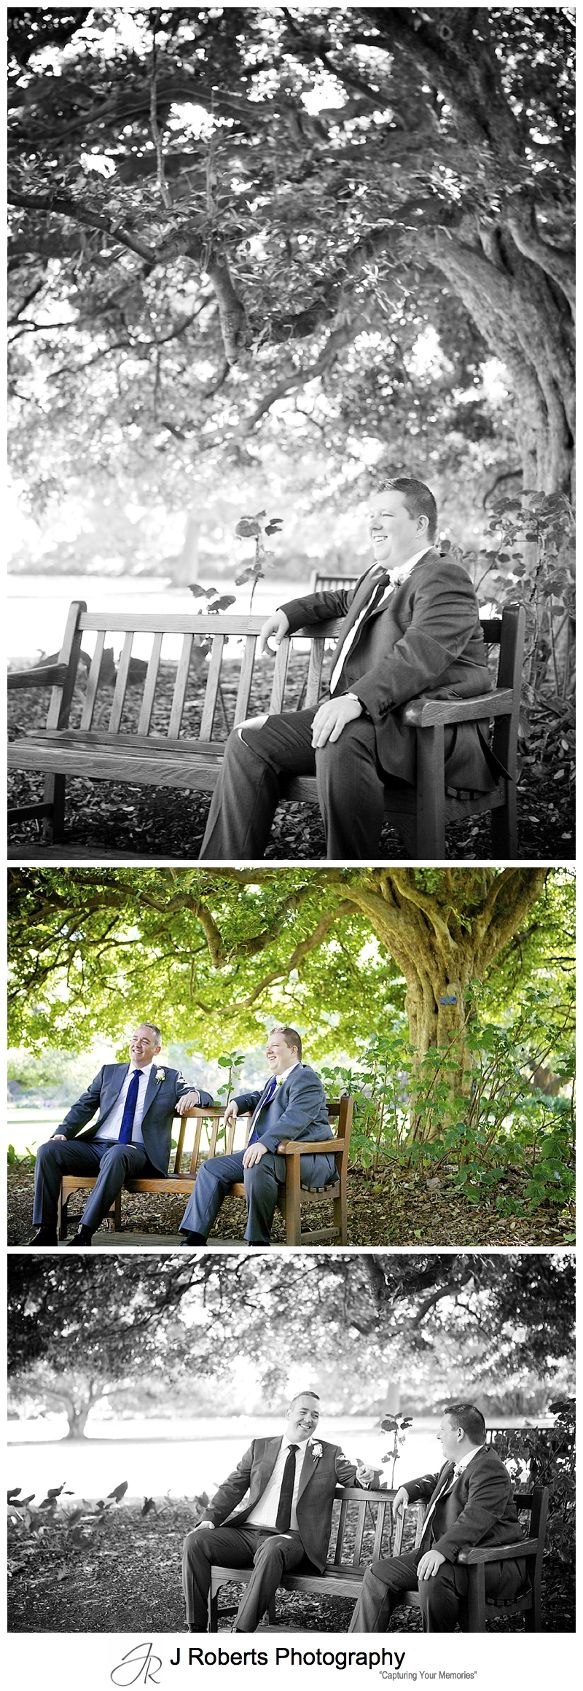 Groom and best man on a seat under the trees at royal botanic gardens sydney - sydney wedding photography